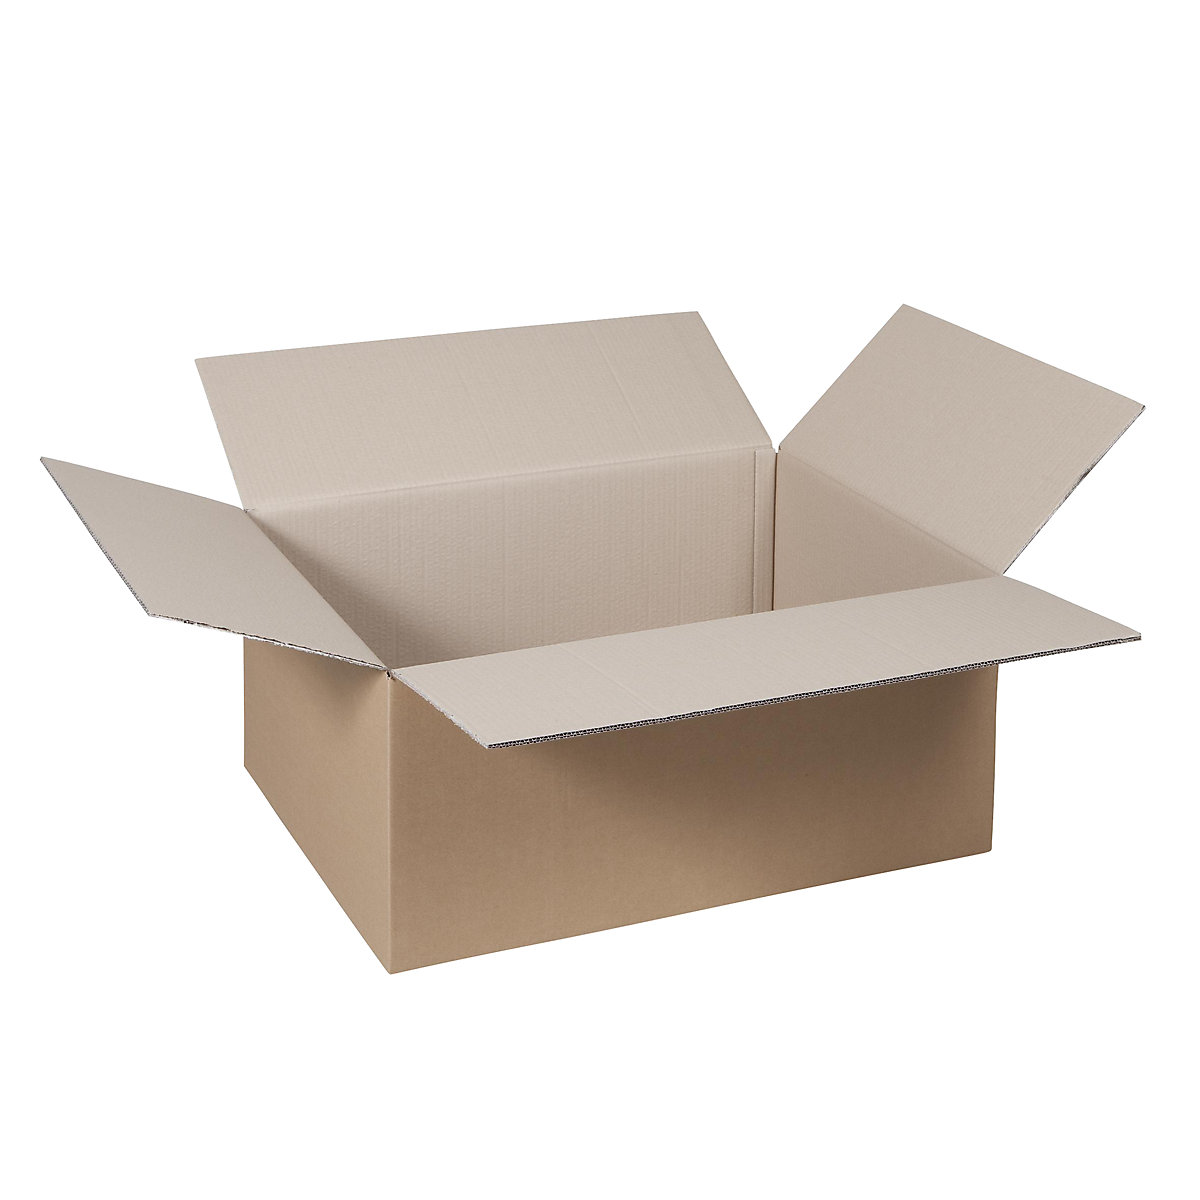 Folding cardboard box, FEFCO 0201, made of double fluted cardboard, internal dimensions 700 x 500 x 300 mm, pack of 50-8